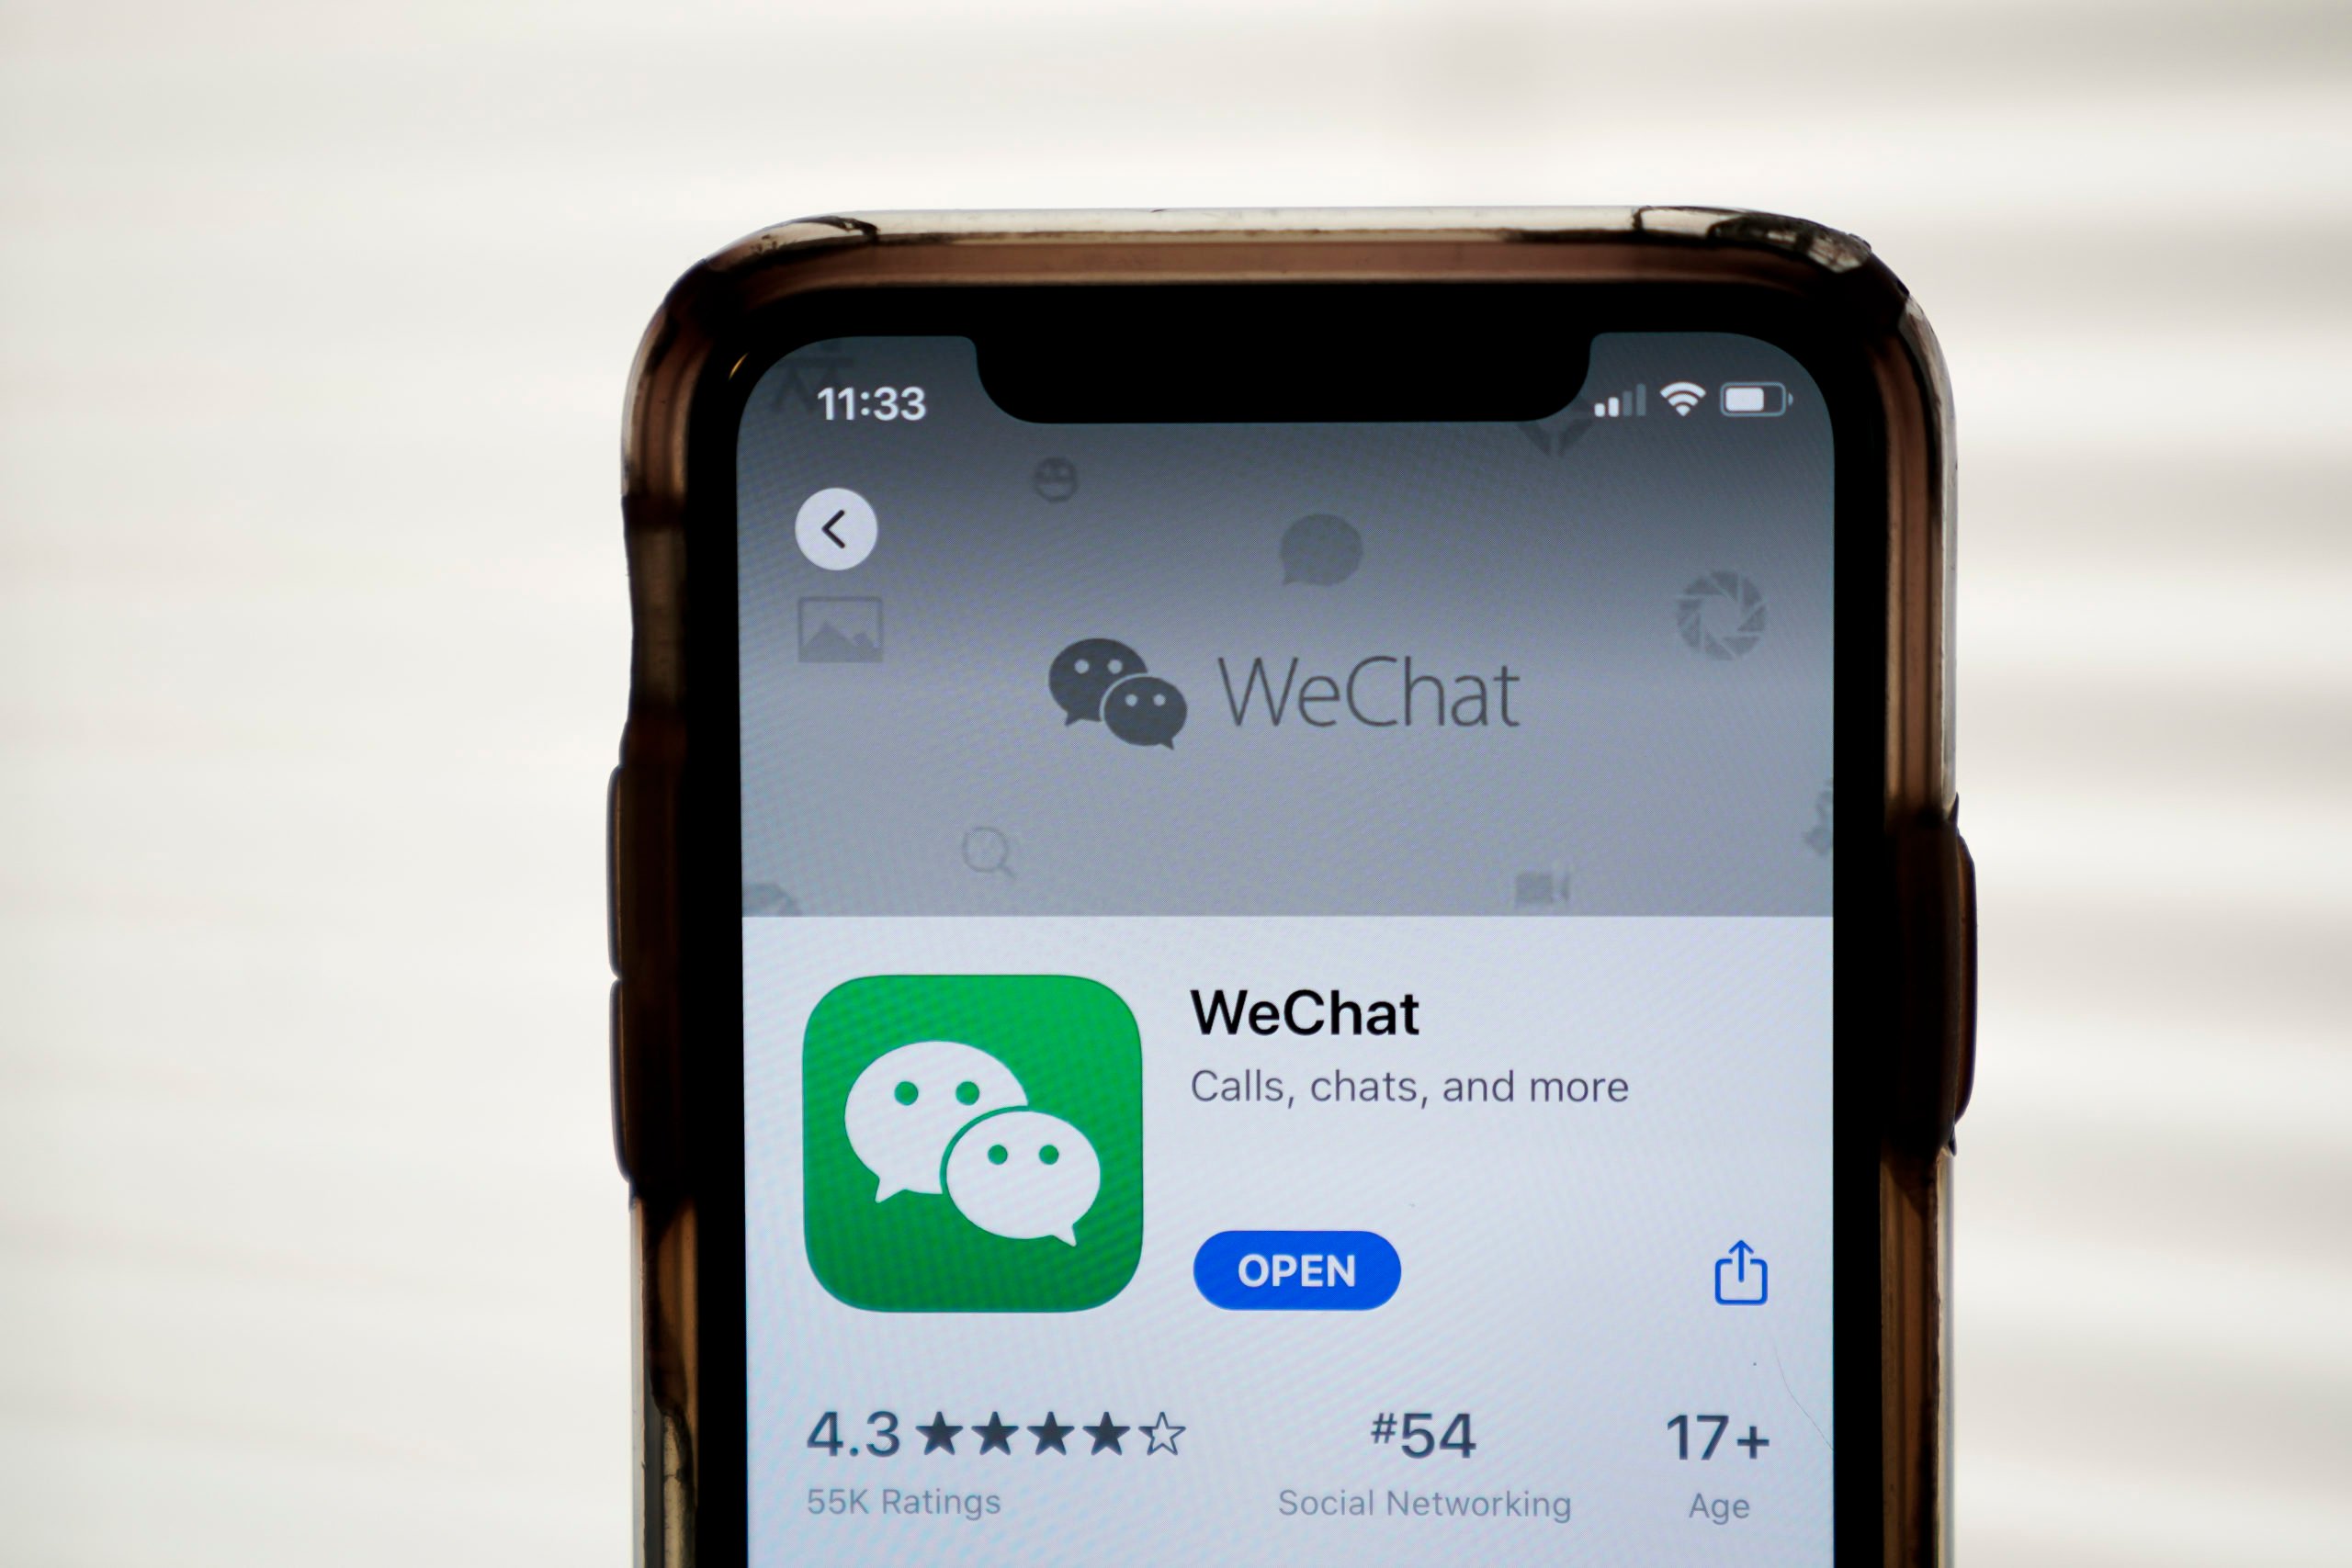 WASHINGTON, DC - AUGUST 07: In this photo illustration, the WeChat app is displayed in the App Store on an Apple iPhone on August 7, 2020 in Washington, DC. On Thursday evening, President Donald Trump signed an executive order that bans any transactions between the parent company of TikTok, ByteDance, and U.S. citizens due to national security reasons. The president signed a separate executive order banning transactions with China-based tech company Tencent, which owns the app WeChat. Both orders are set to take effect in 45 days. (Photo Illustration by Drew Angerer/Getty Images)